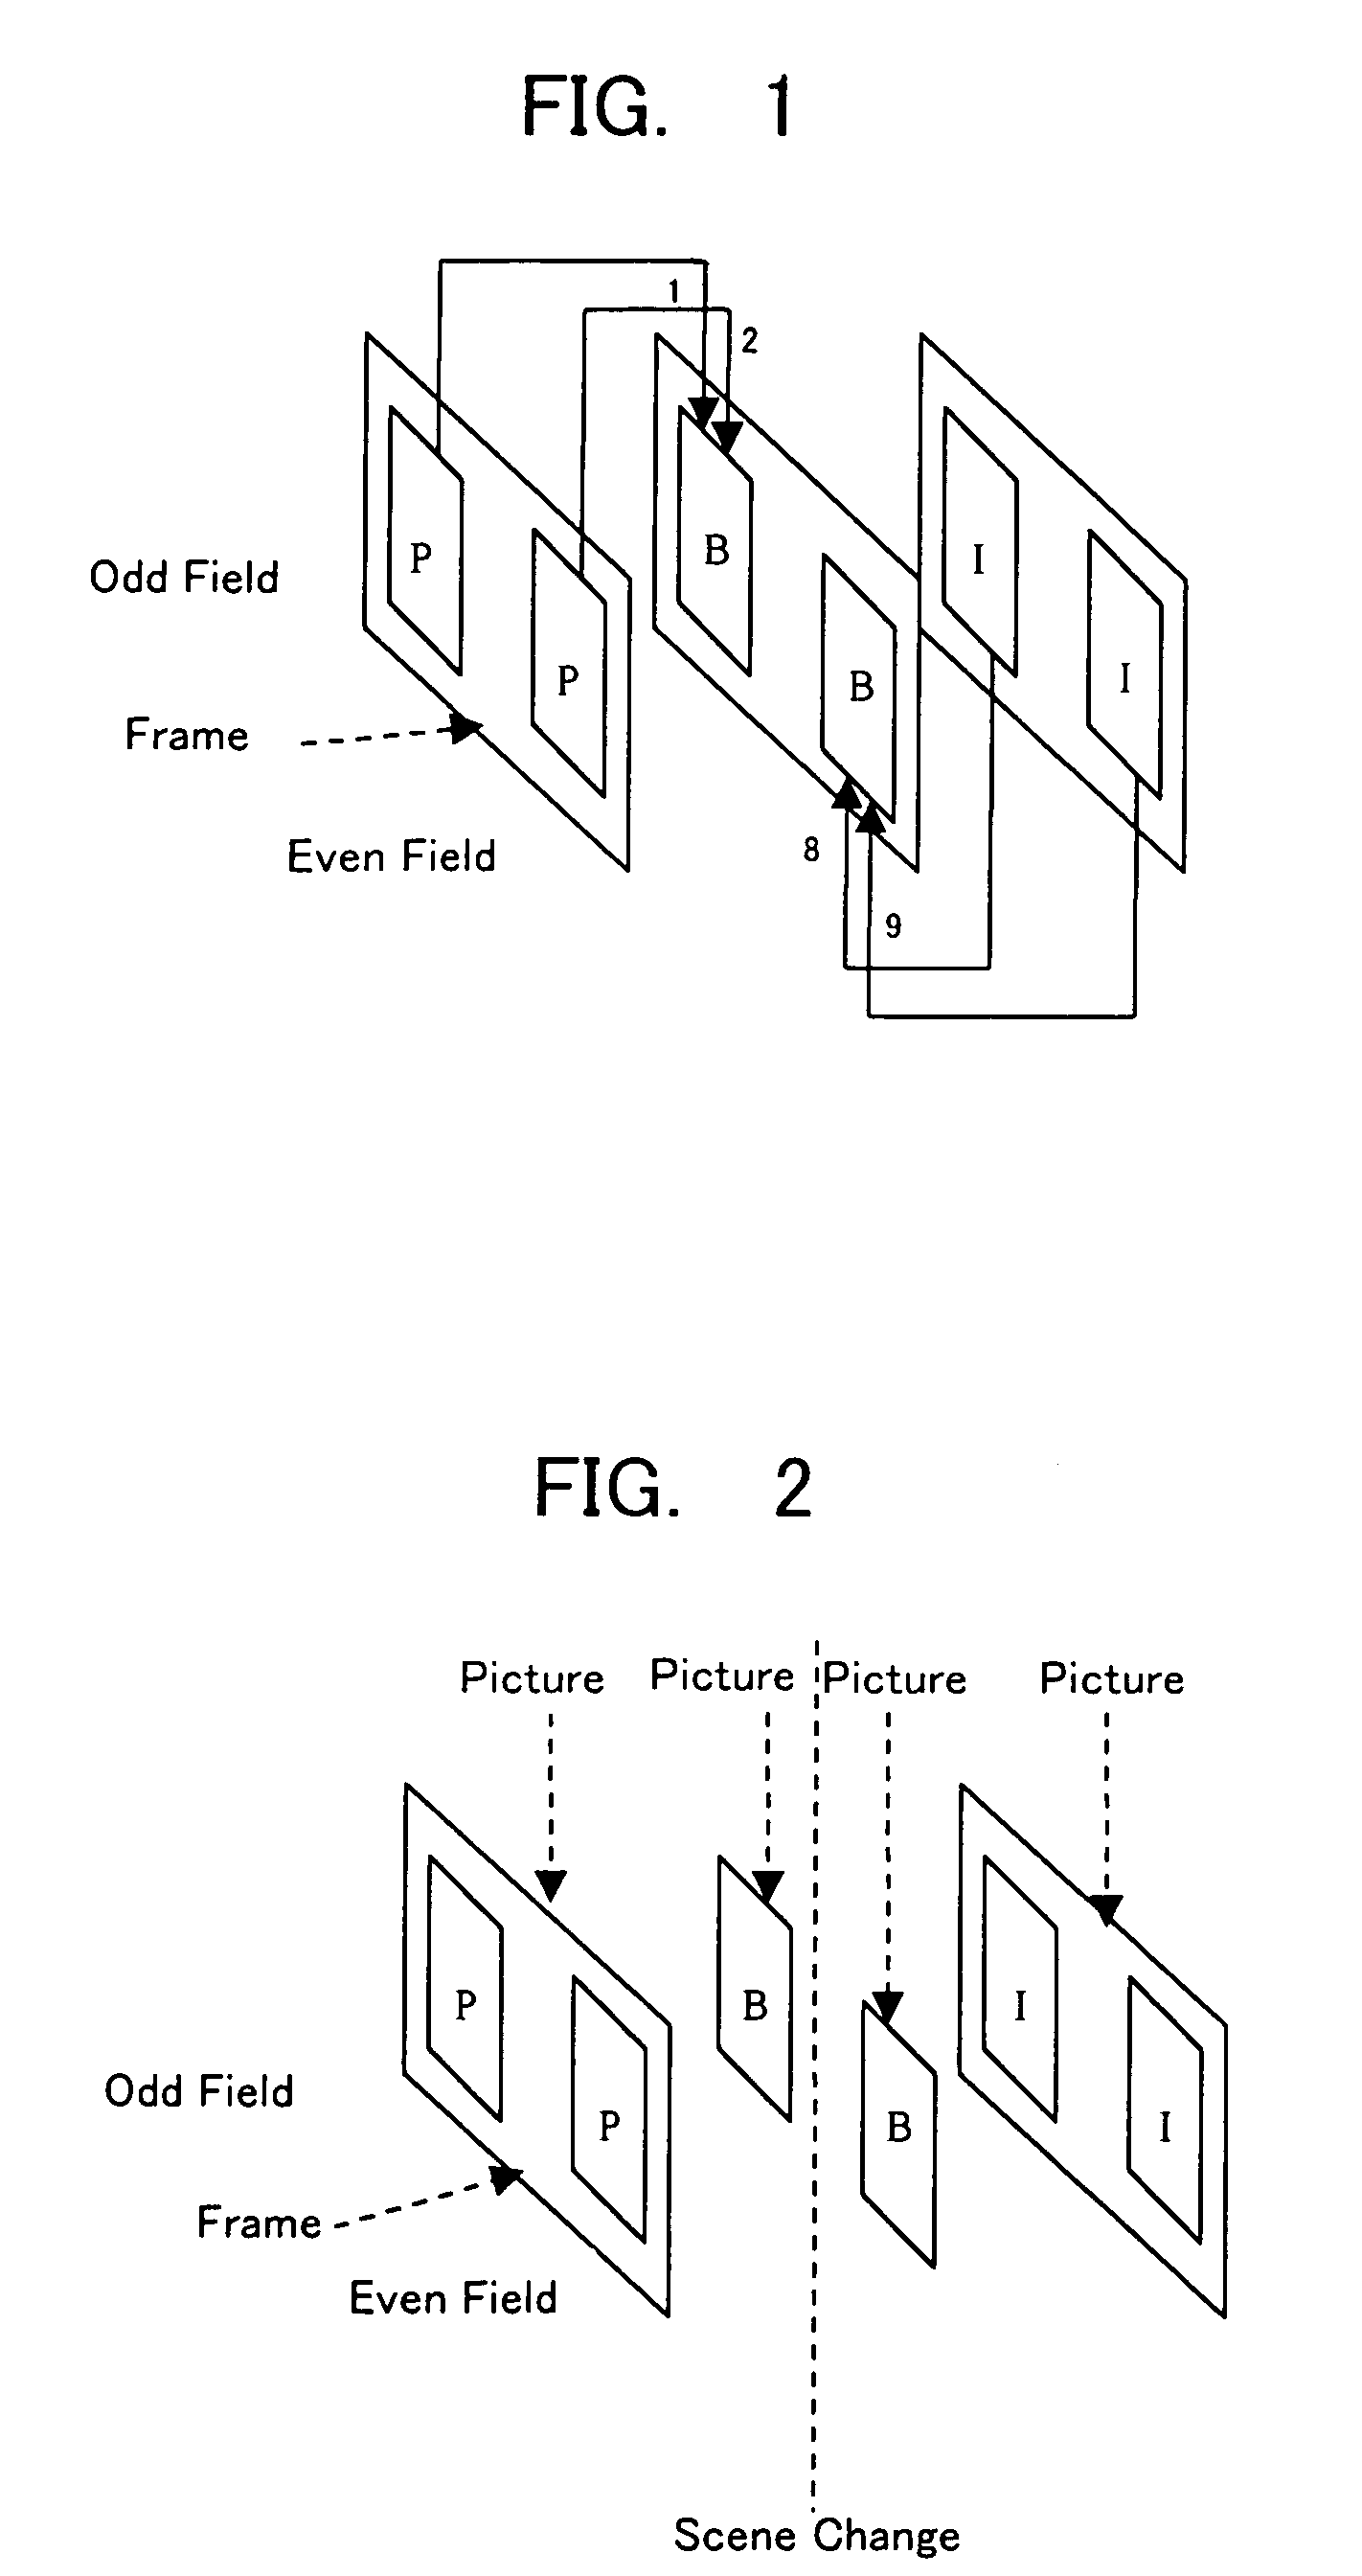 Moving pictures encoding method and apparatus for detecting a scene change between fields of an interlaced image